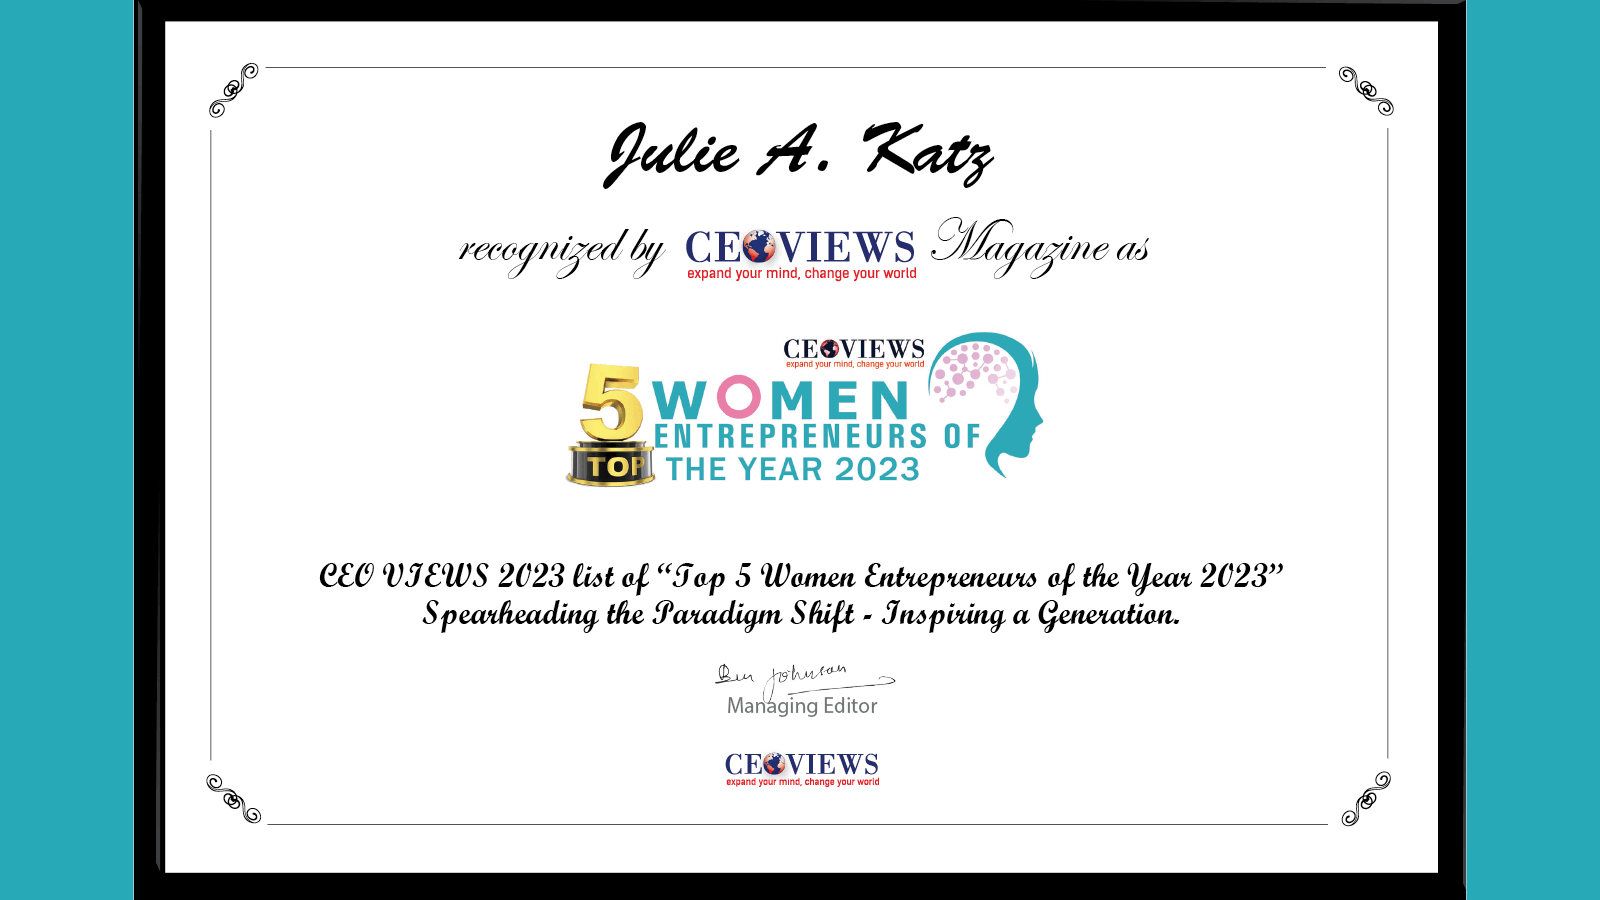 Julie A. Katz Named One of the Top 5 Women Entrepreneurs of the Year 2023